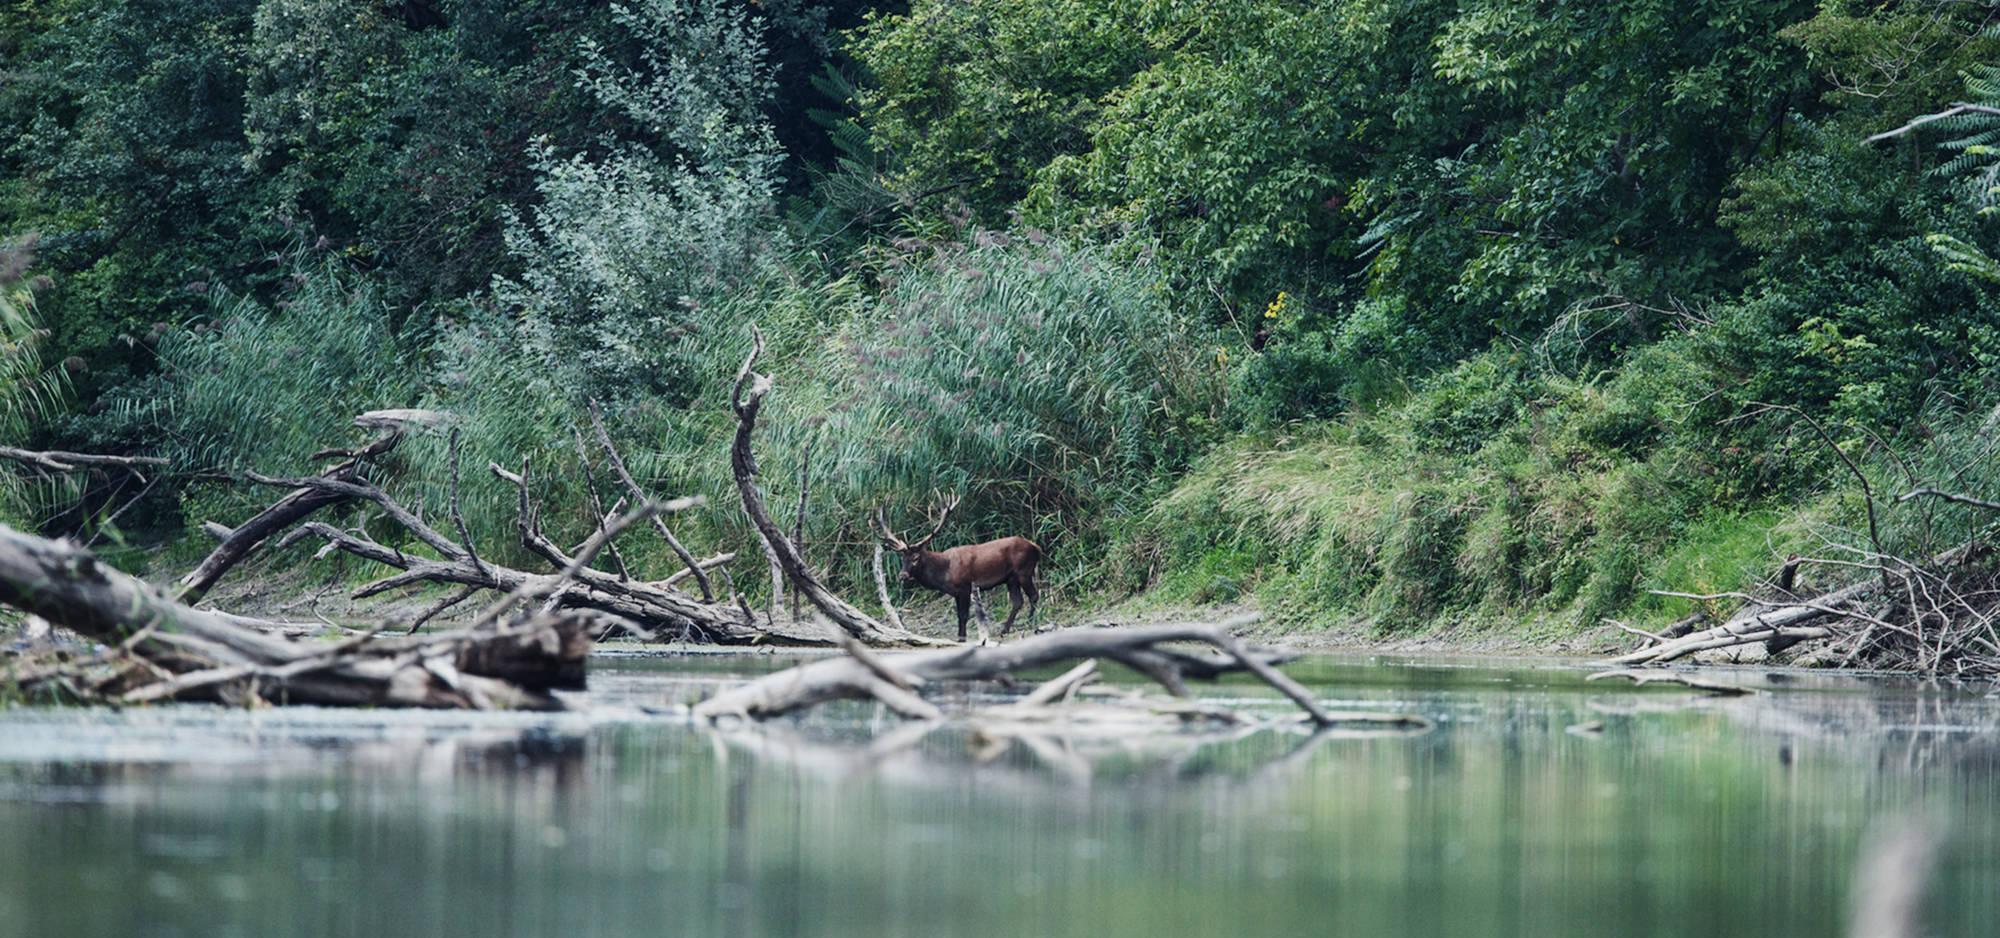 A deer by the river